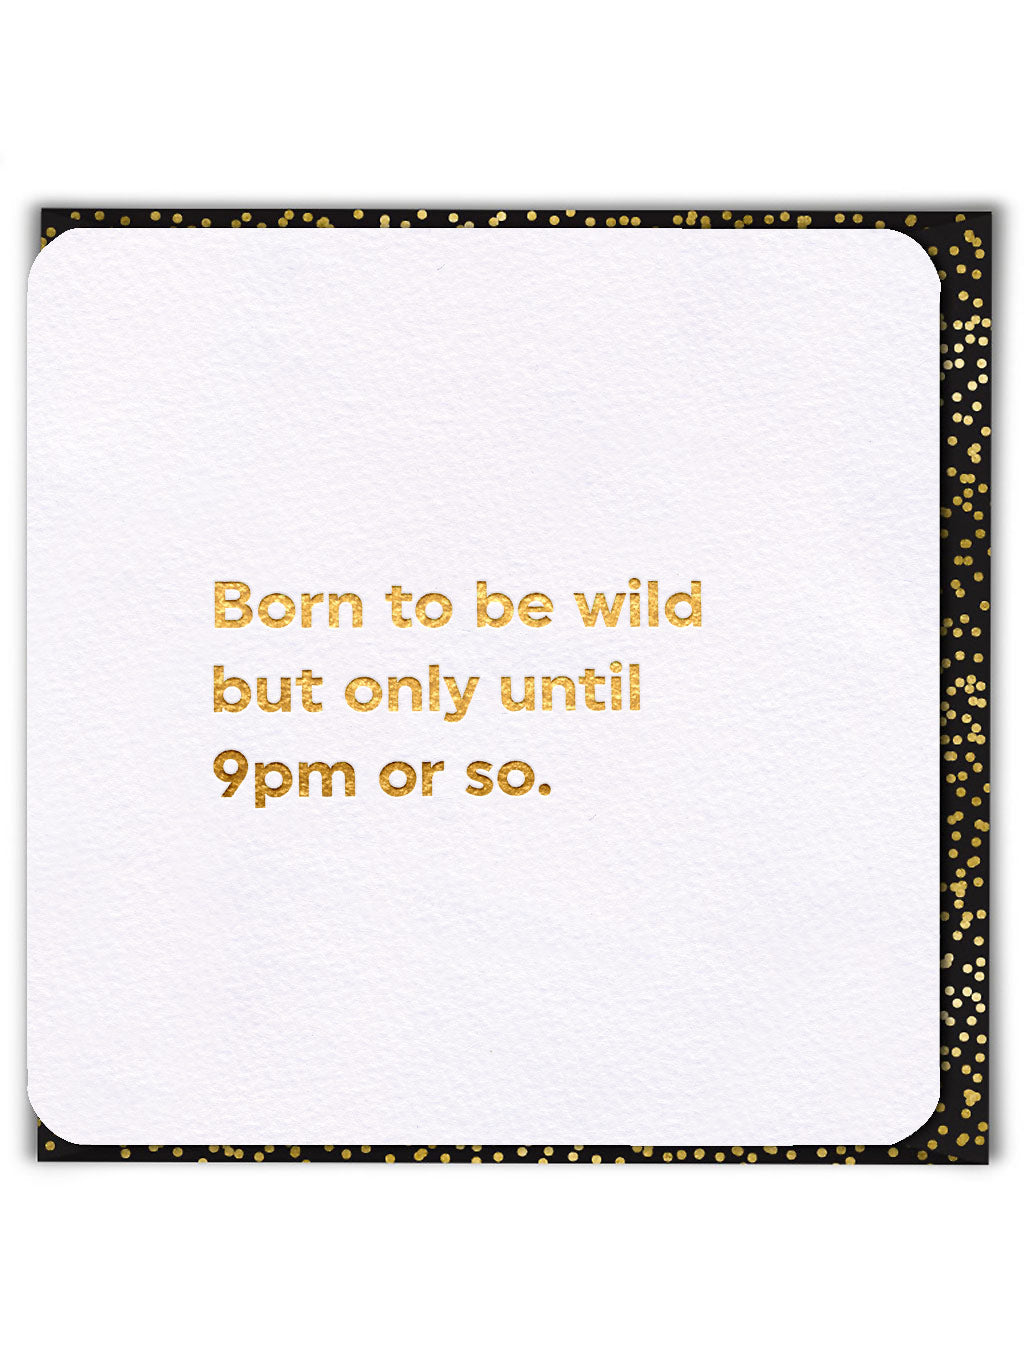 Born To Be Wild Until 9pm Quotish Funny Card from Penny Black